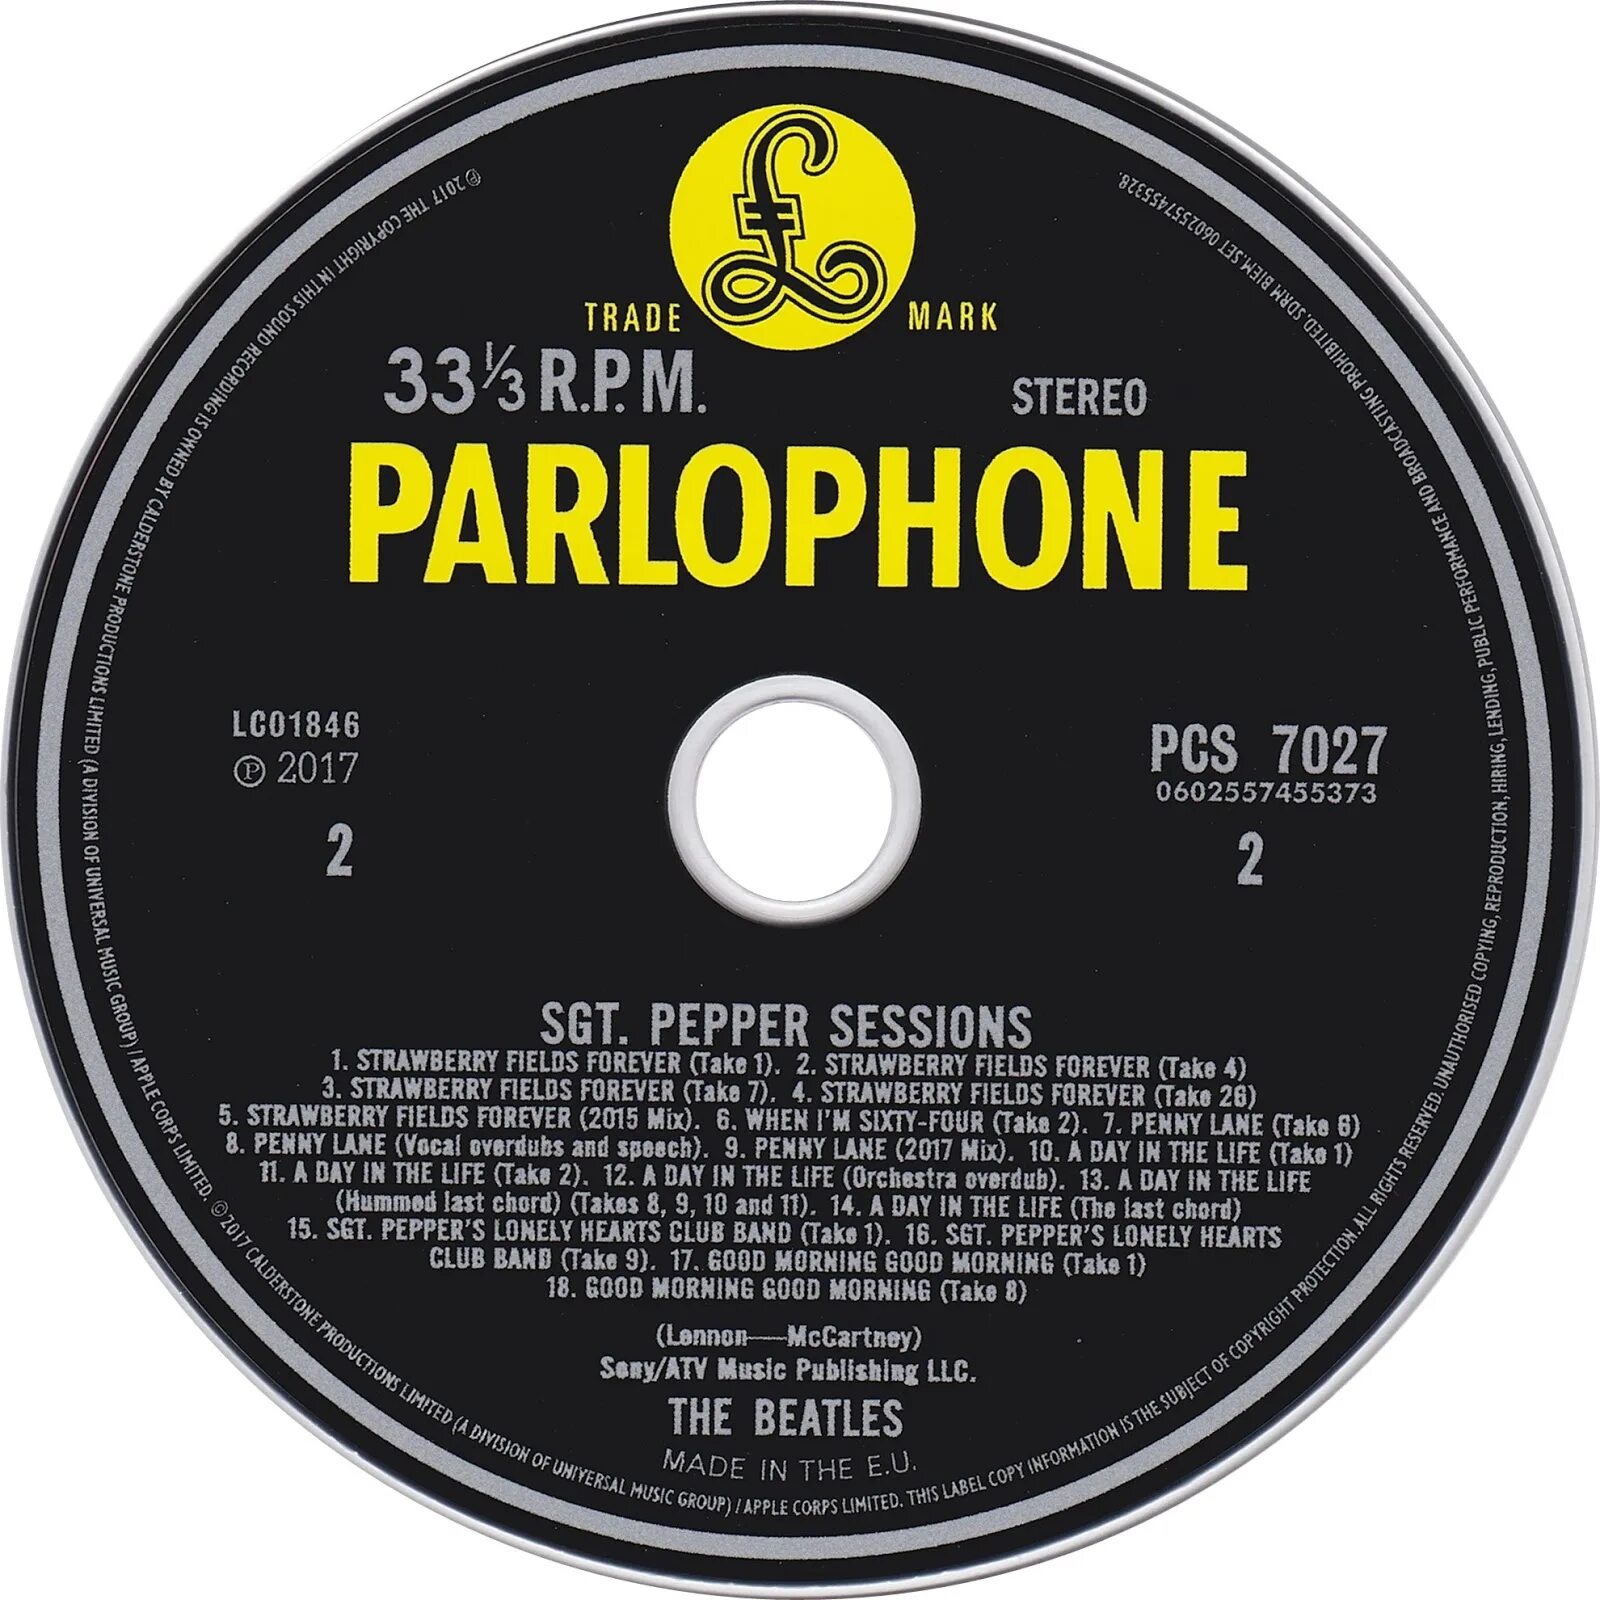 Mp3 pepper. The Beatles with the Beatles 1963. Битлз Rubber Soul. Компакт-диск Beatles the 1. With the Beatles альбом диск.